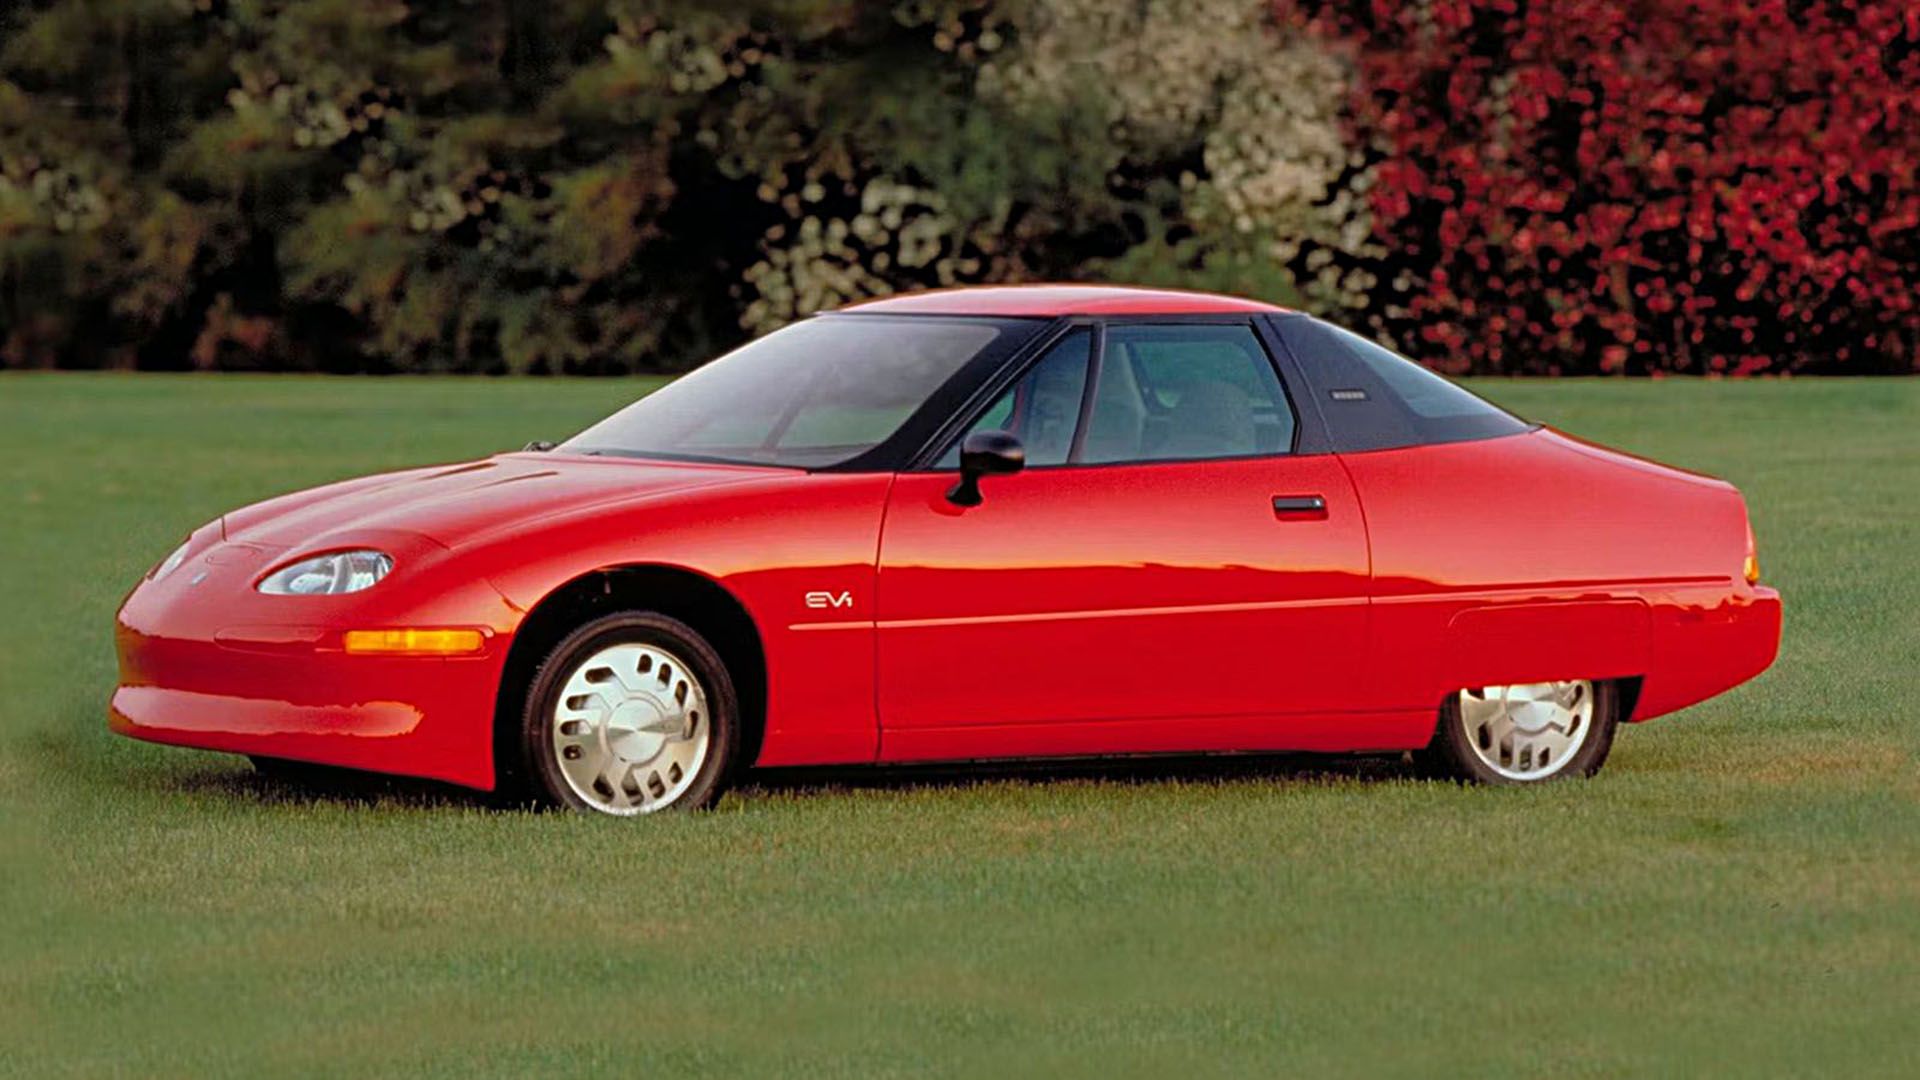 Profile view of a red GM EV1